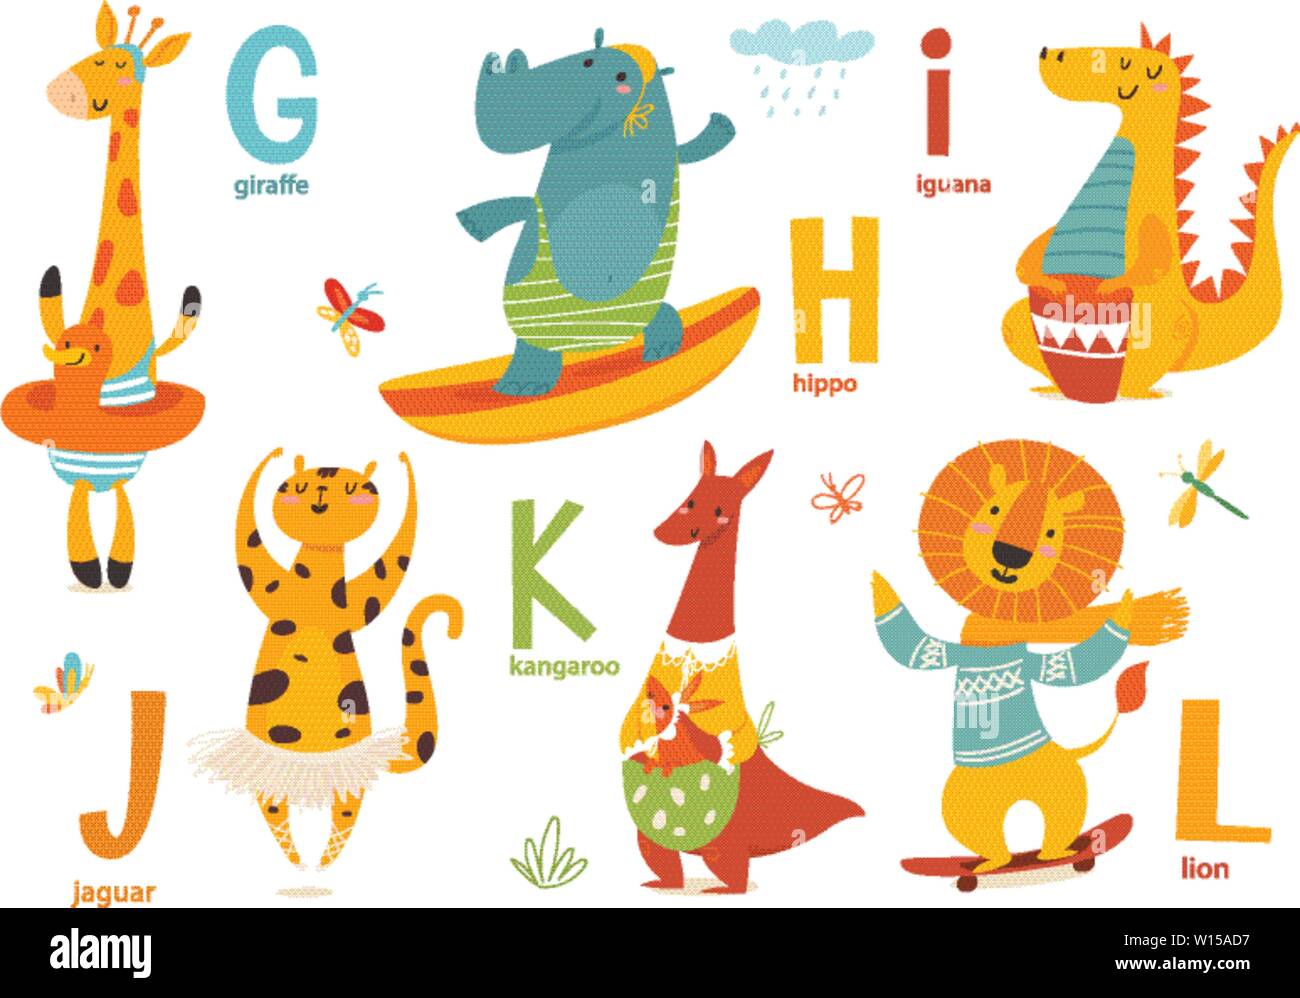 Alphabet animals Cut Out Stock Images & Pictures - Alamy